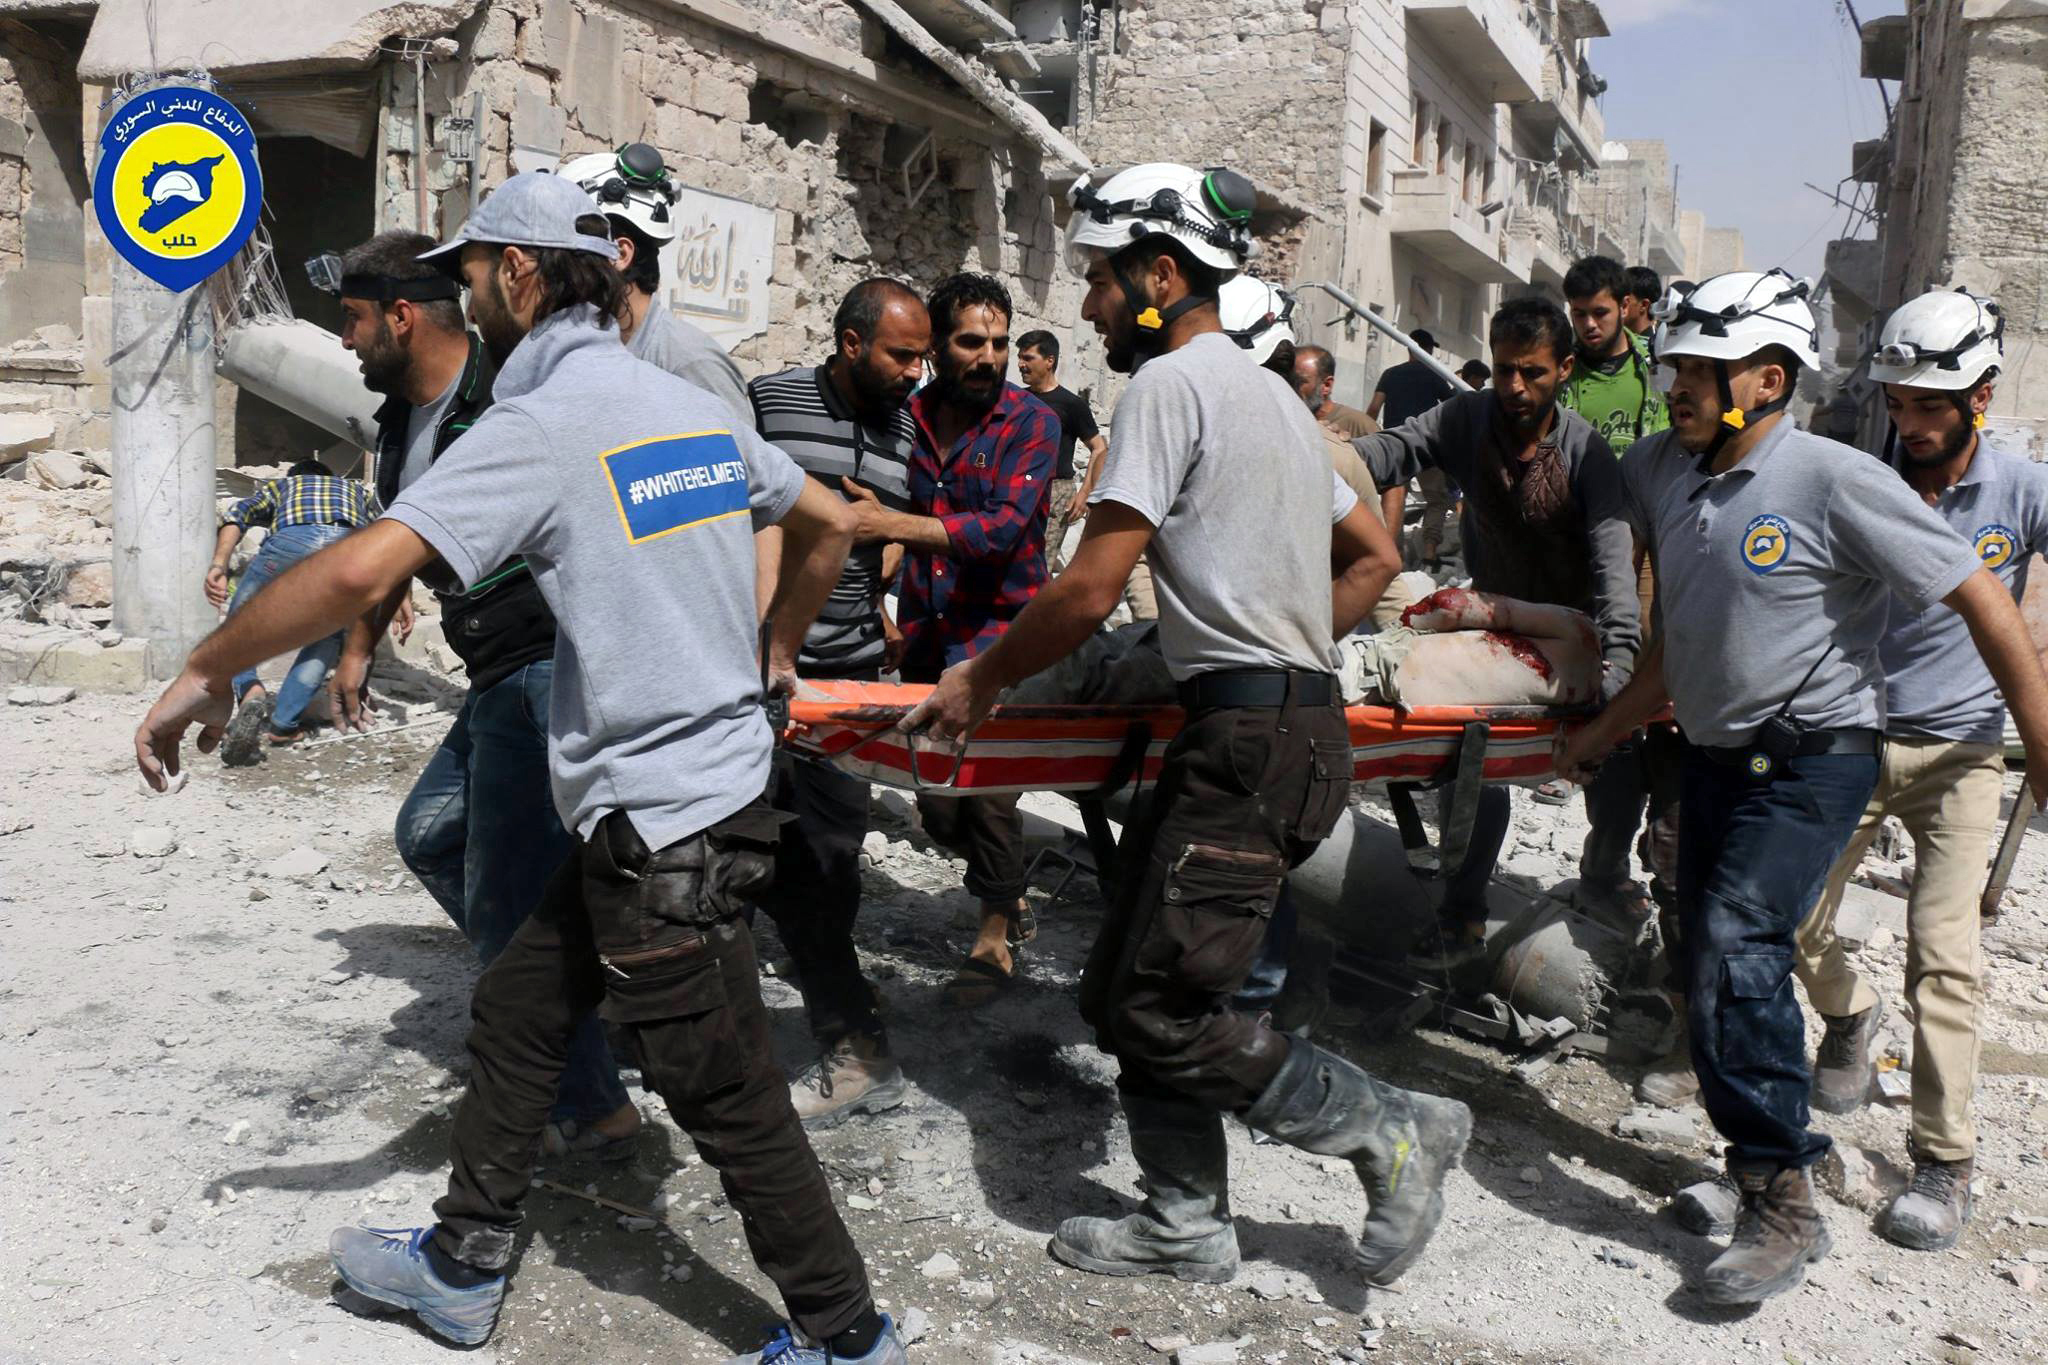 FILE - In this Wednesday, Sept. 21, 2016, file photo, provided by the Syrian Civil Defense White Helmets, rescue workers work the site of airstrikes in the al-Sakhour neighborhood of the rebel-held part of eastern Aleppo, Syria. Violence in Aleppo has surged in recent days as a U.S.-Russia-brokered cease-fire collapsed after one week. The Syrian government and its ally Russia have resumed intense airstrikes and Syrian military officials have spoken of a looming ground offensive against rebel-held districts. (Syrian Civil Defense White Helmets via AP)